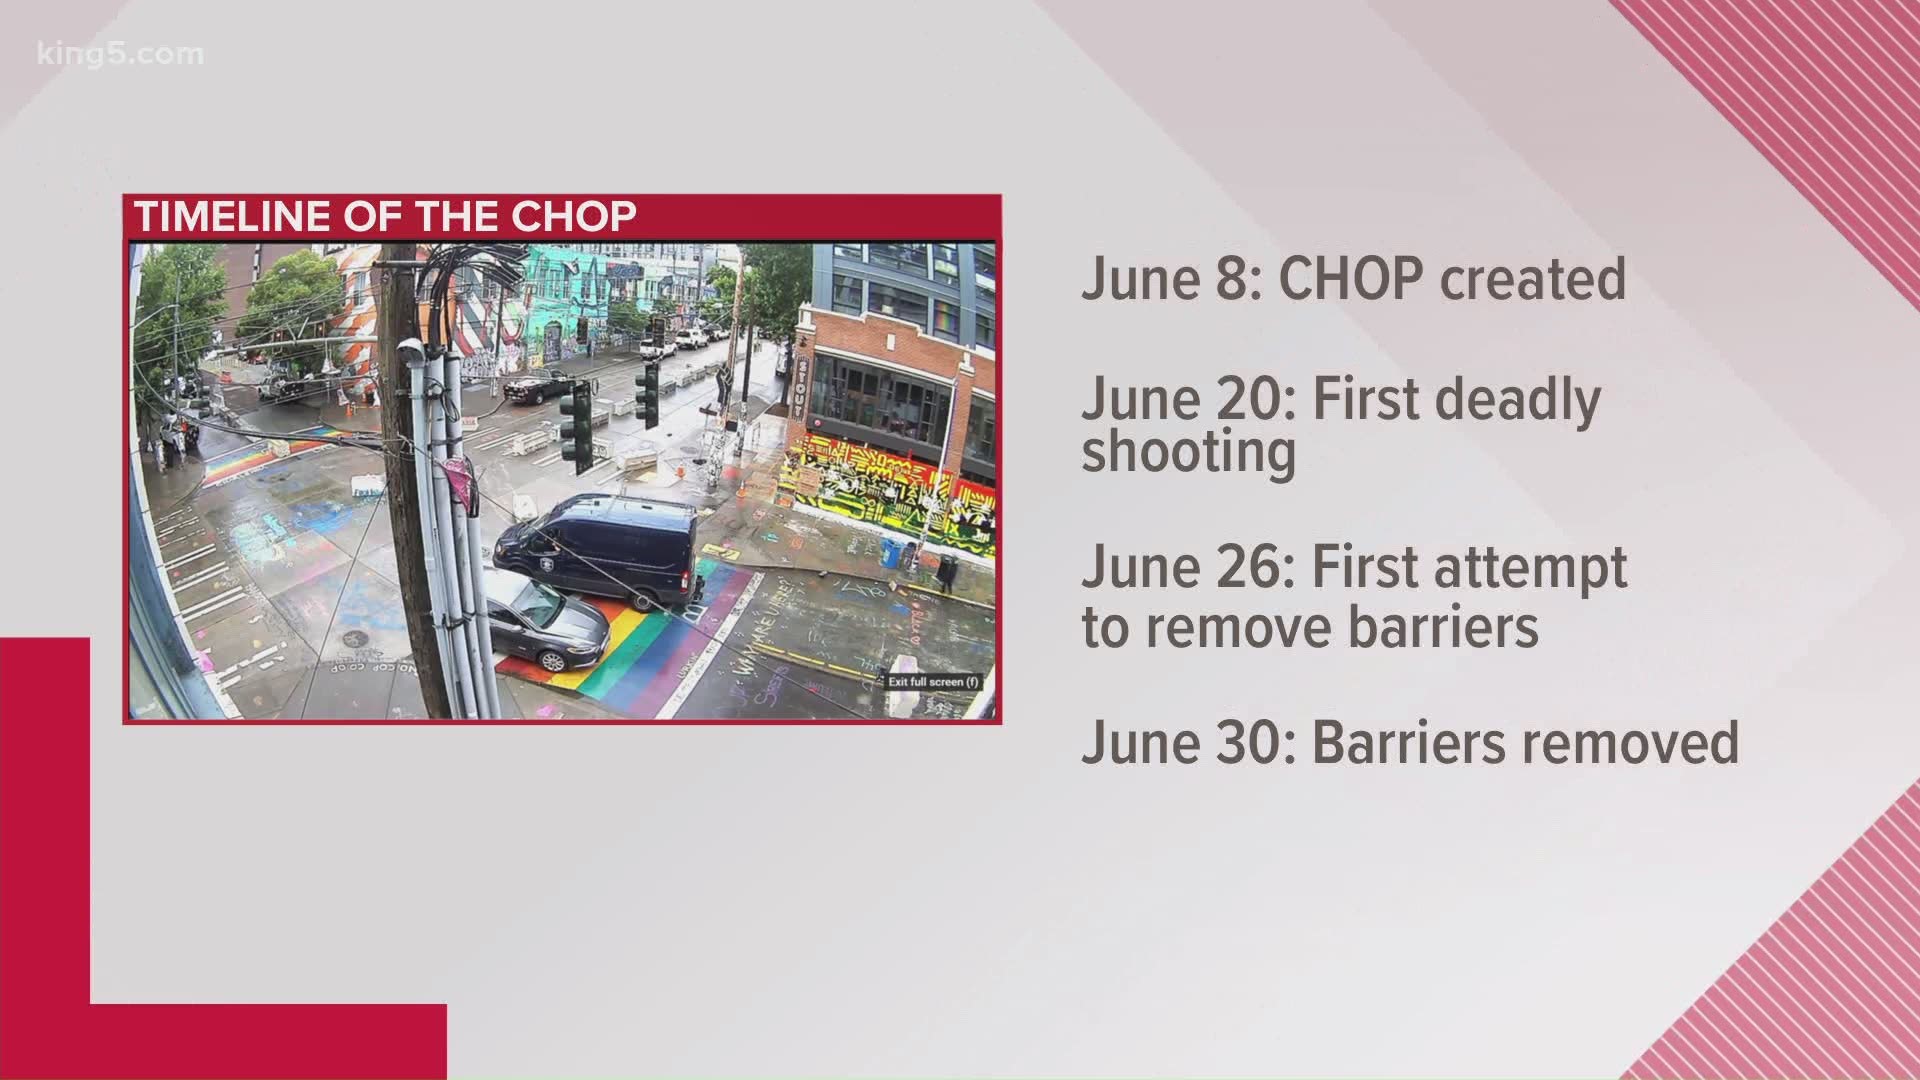 The Capitol Hill Organized Protest (CHOP) zone was formed June 8, and its barriers were removed June 30.